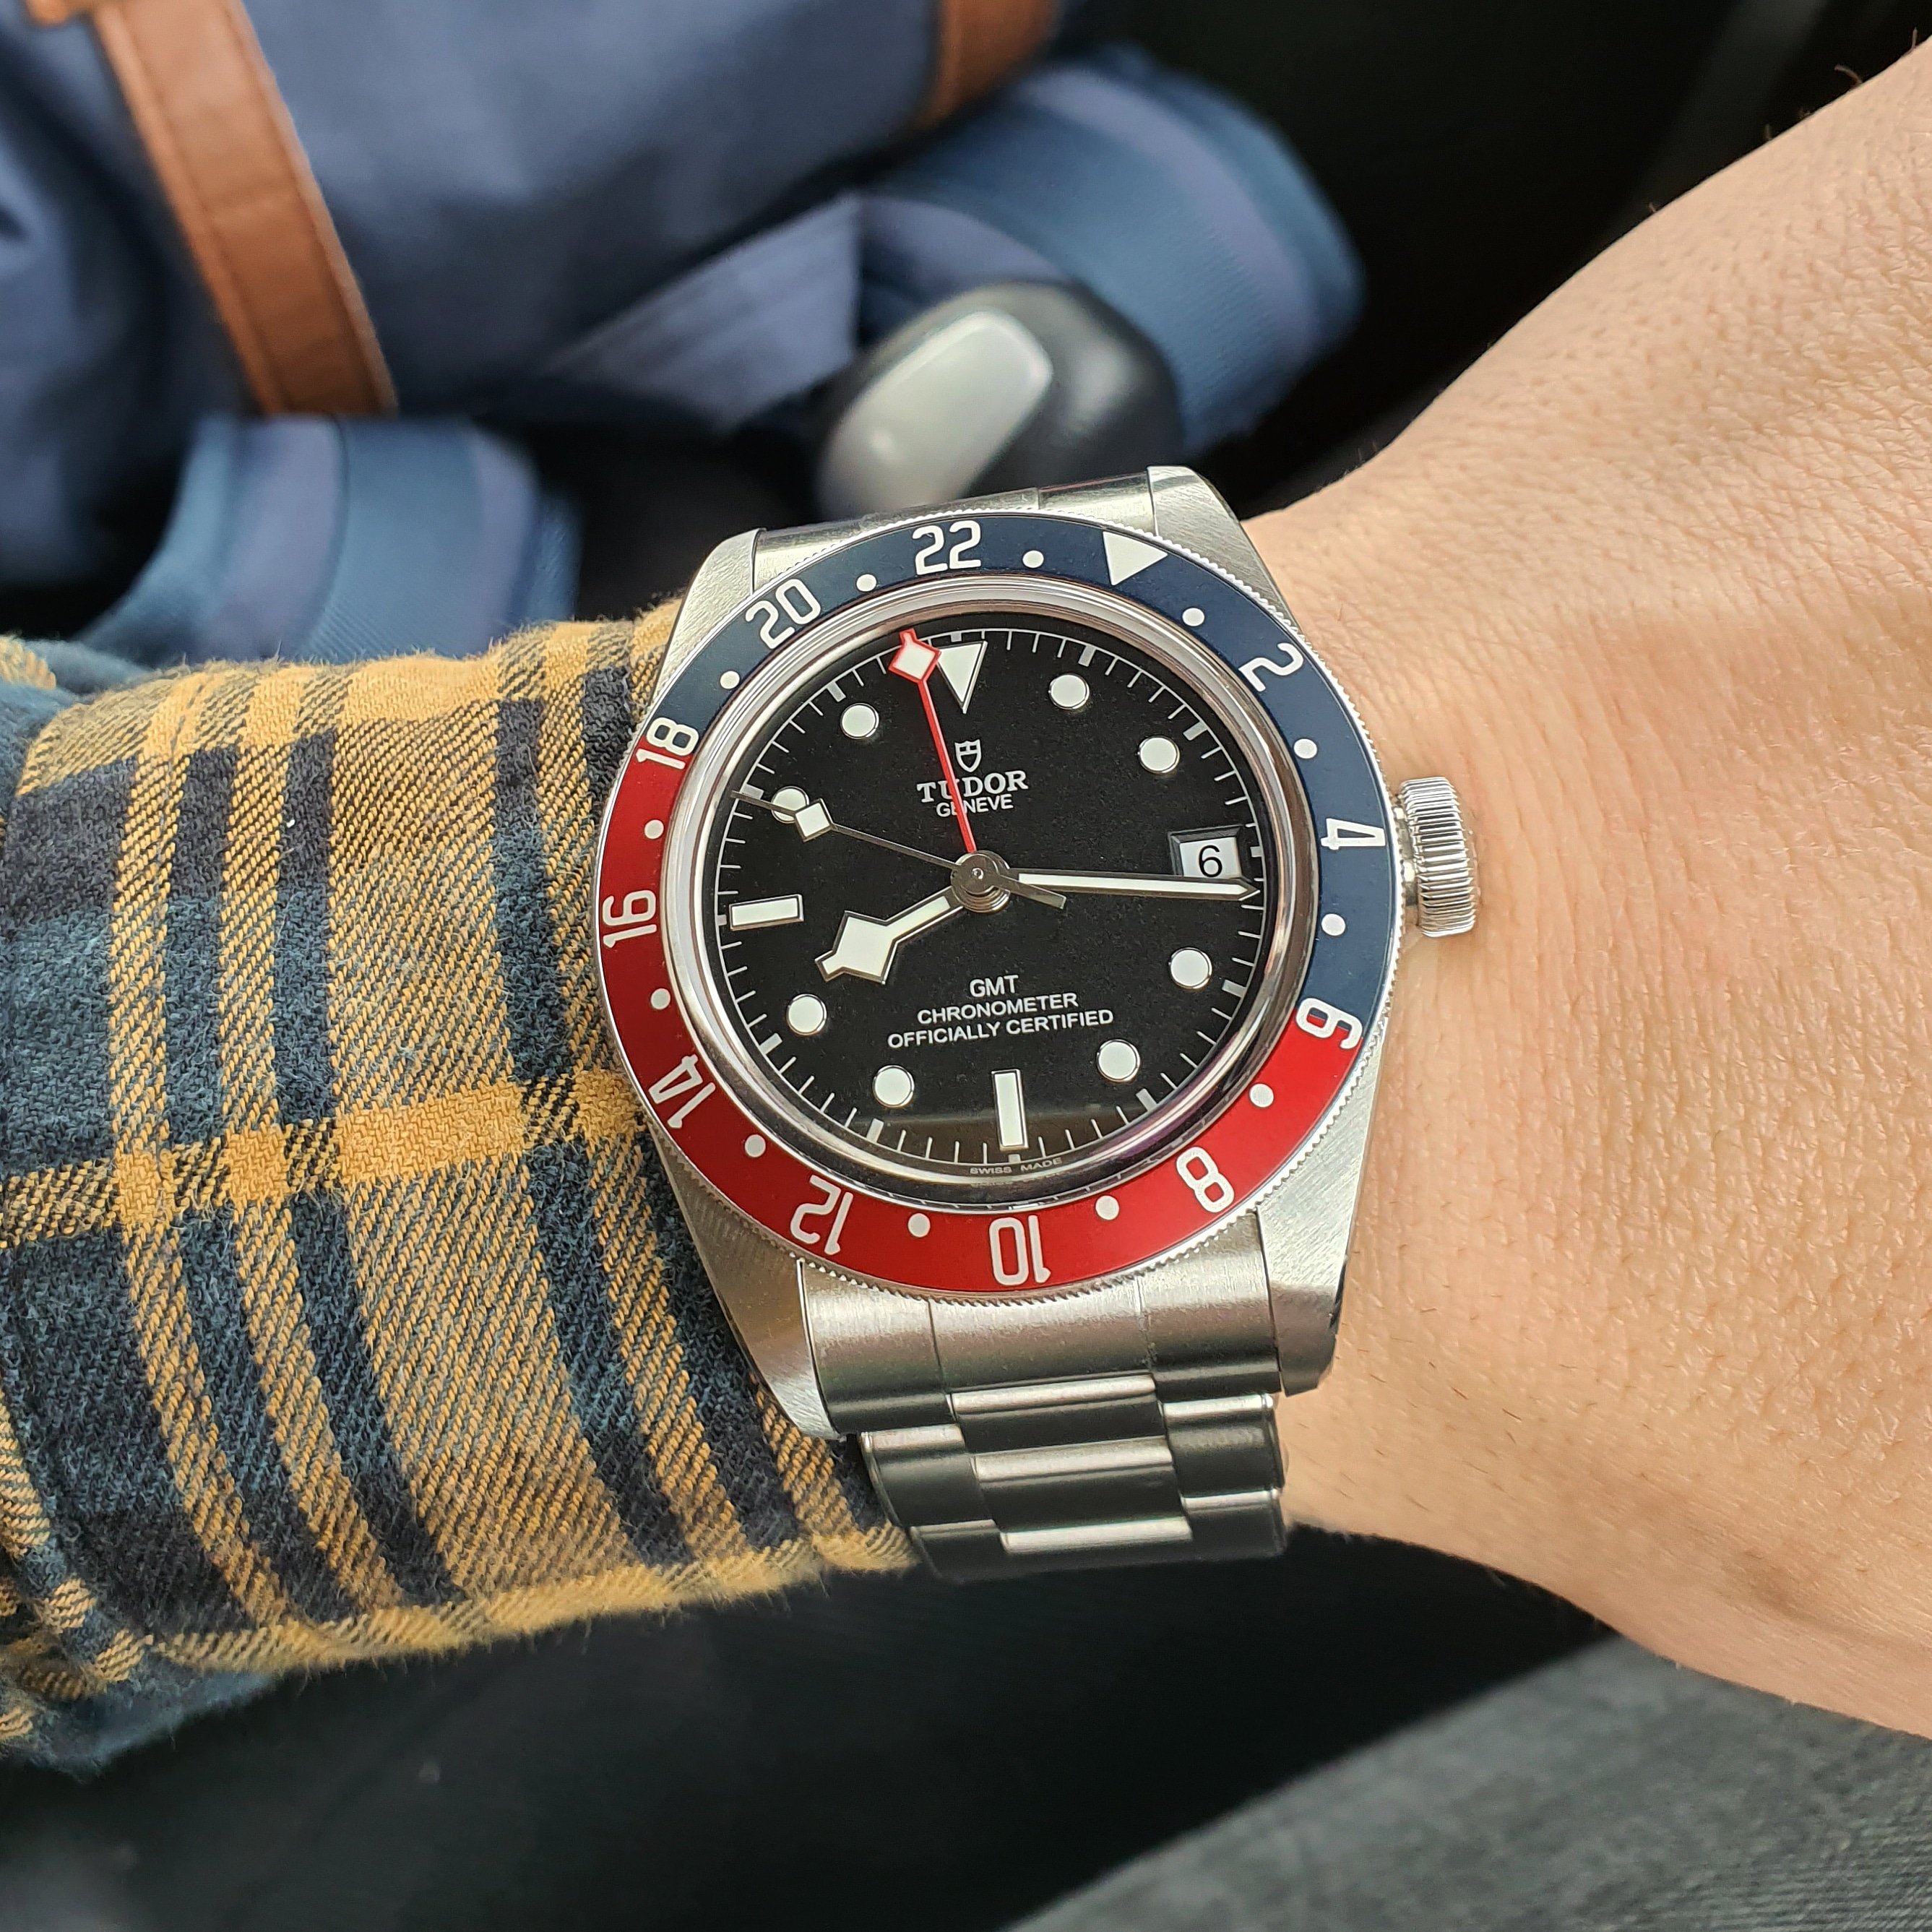 The Tudor Black Bay GMT: The only watch 